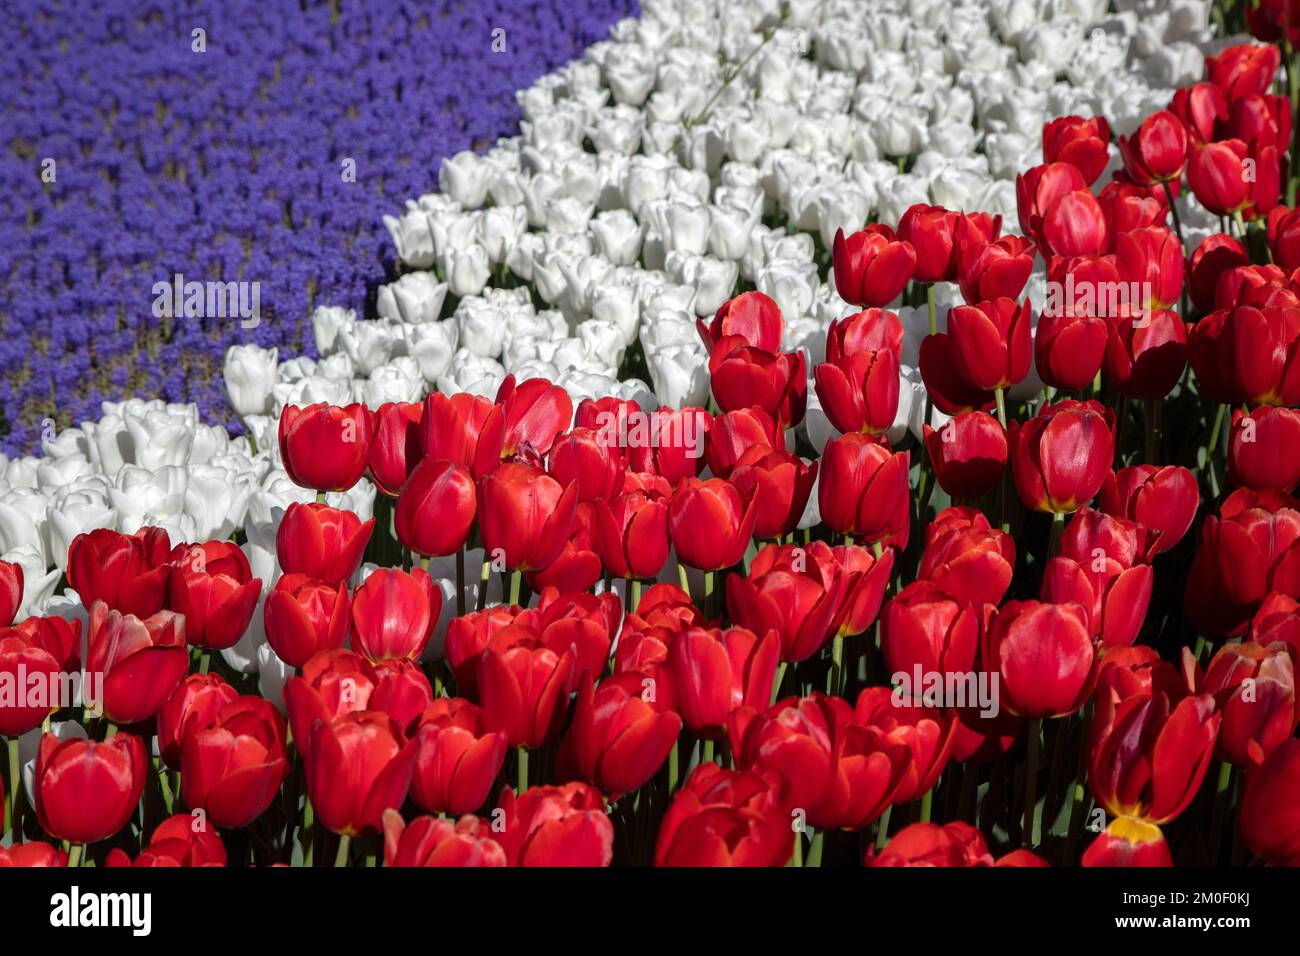 Red white tulips and purple hyacinth flowers Stock Photo